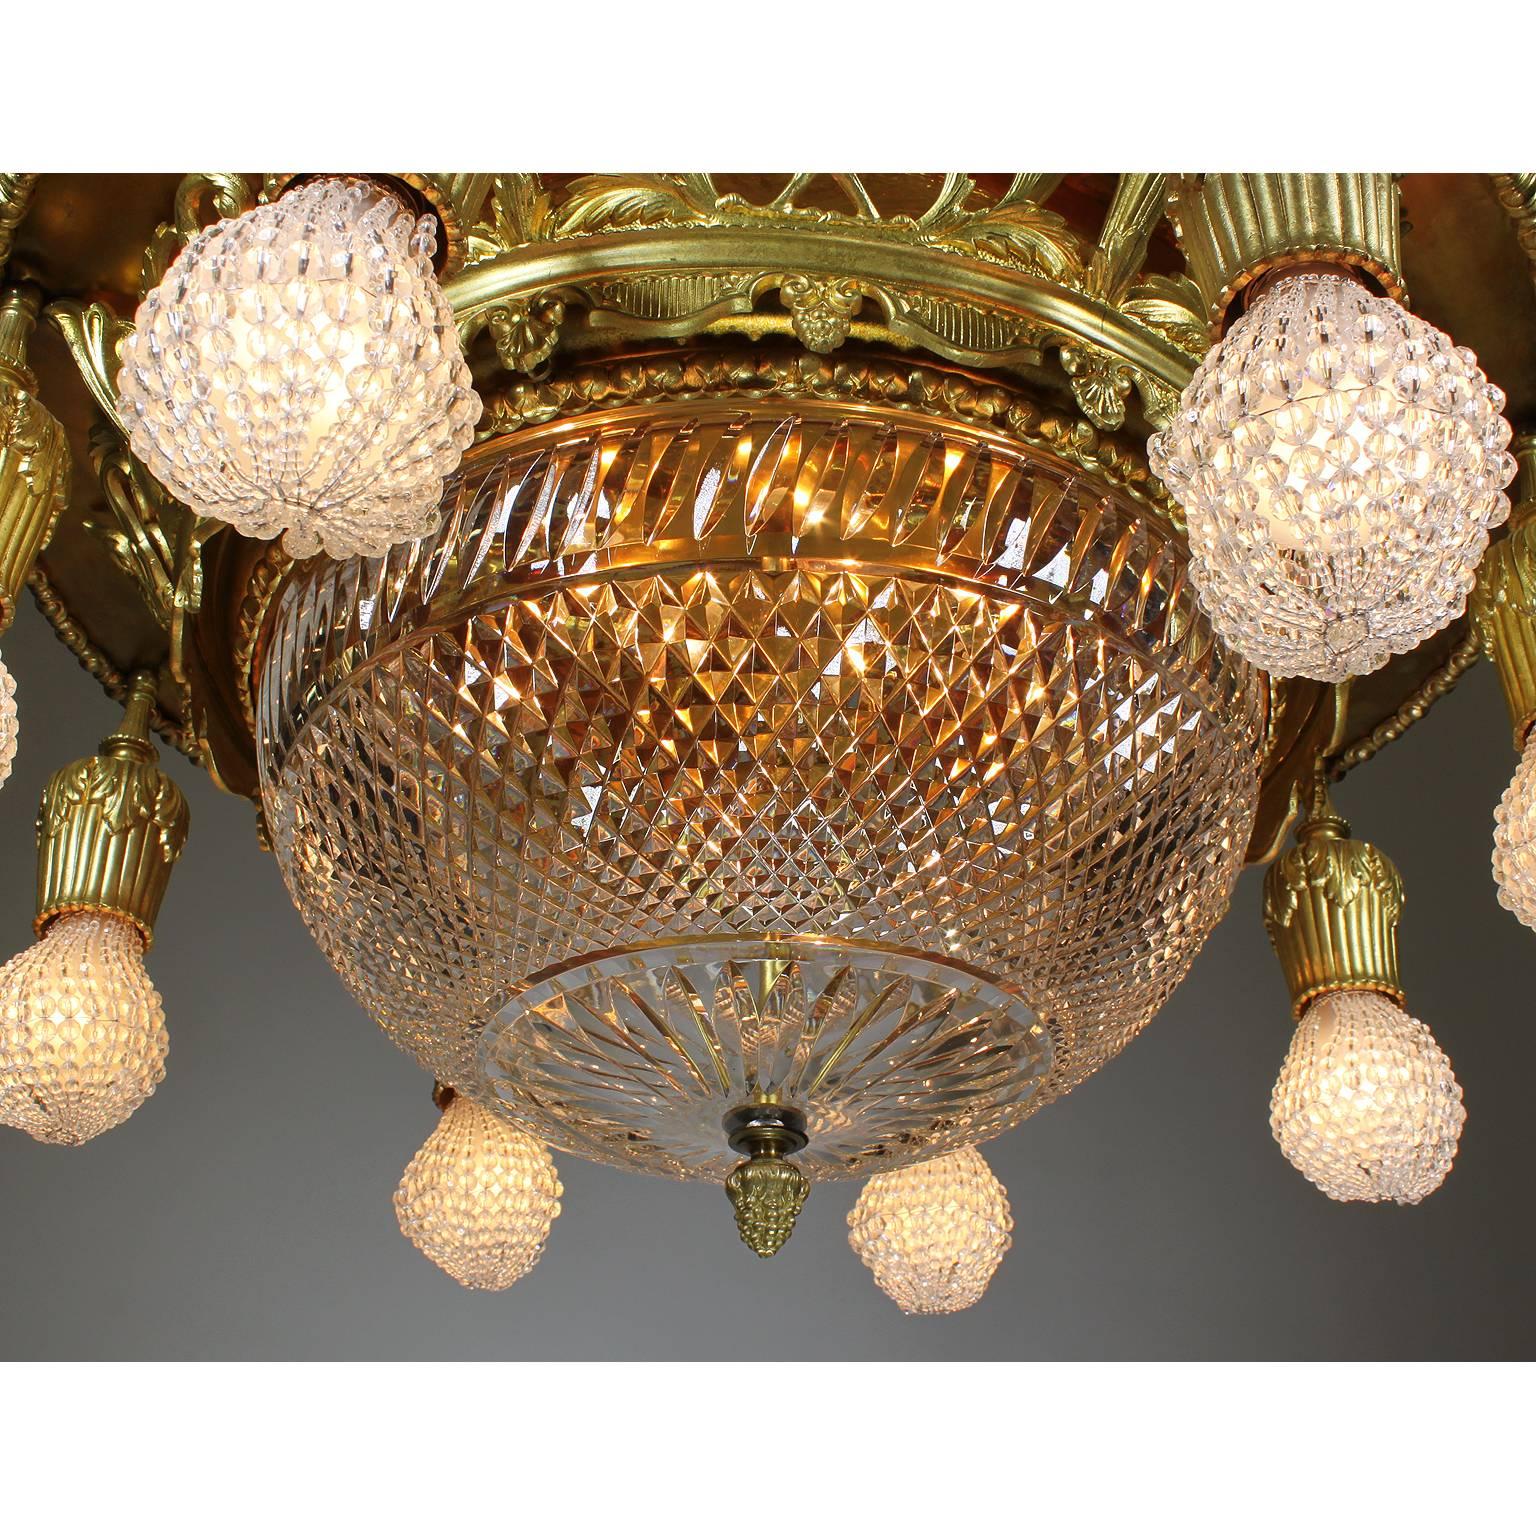 French 19th-20th Century Gilt Bronze and Cut-Glass Plafonnier, Attributed to Baccarat